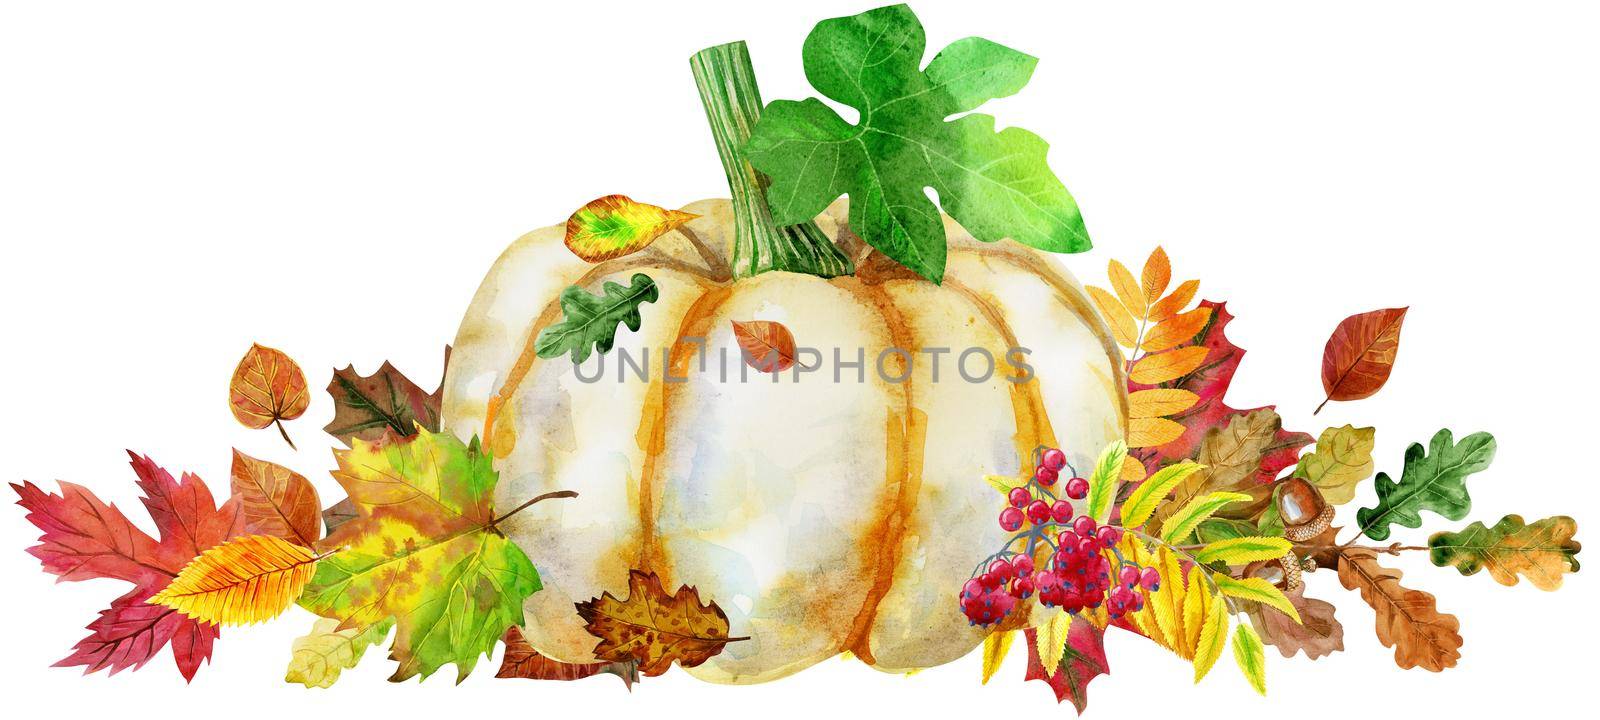 Fall leaves with pumpkin on white background, fall harvest